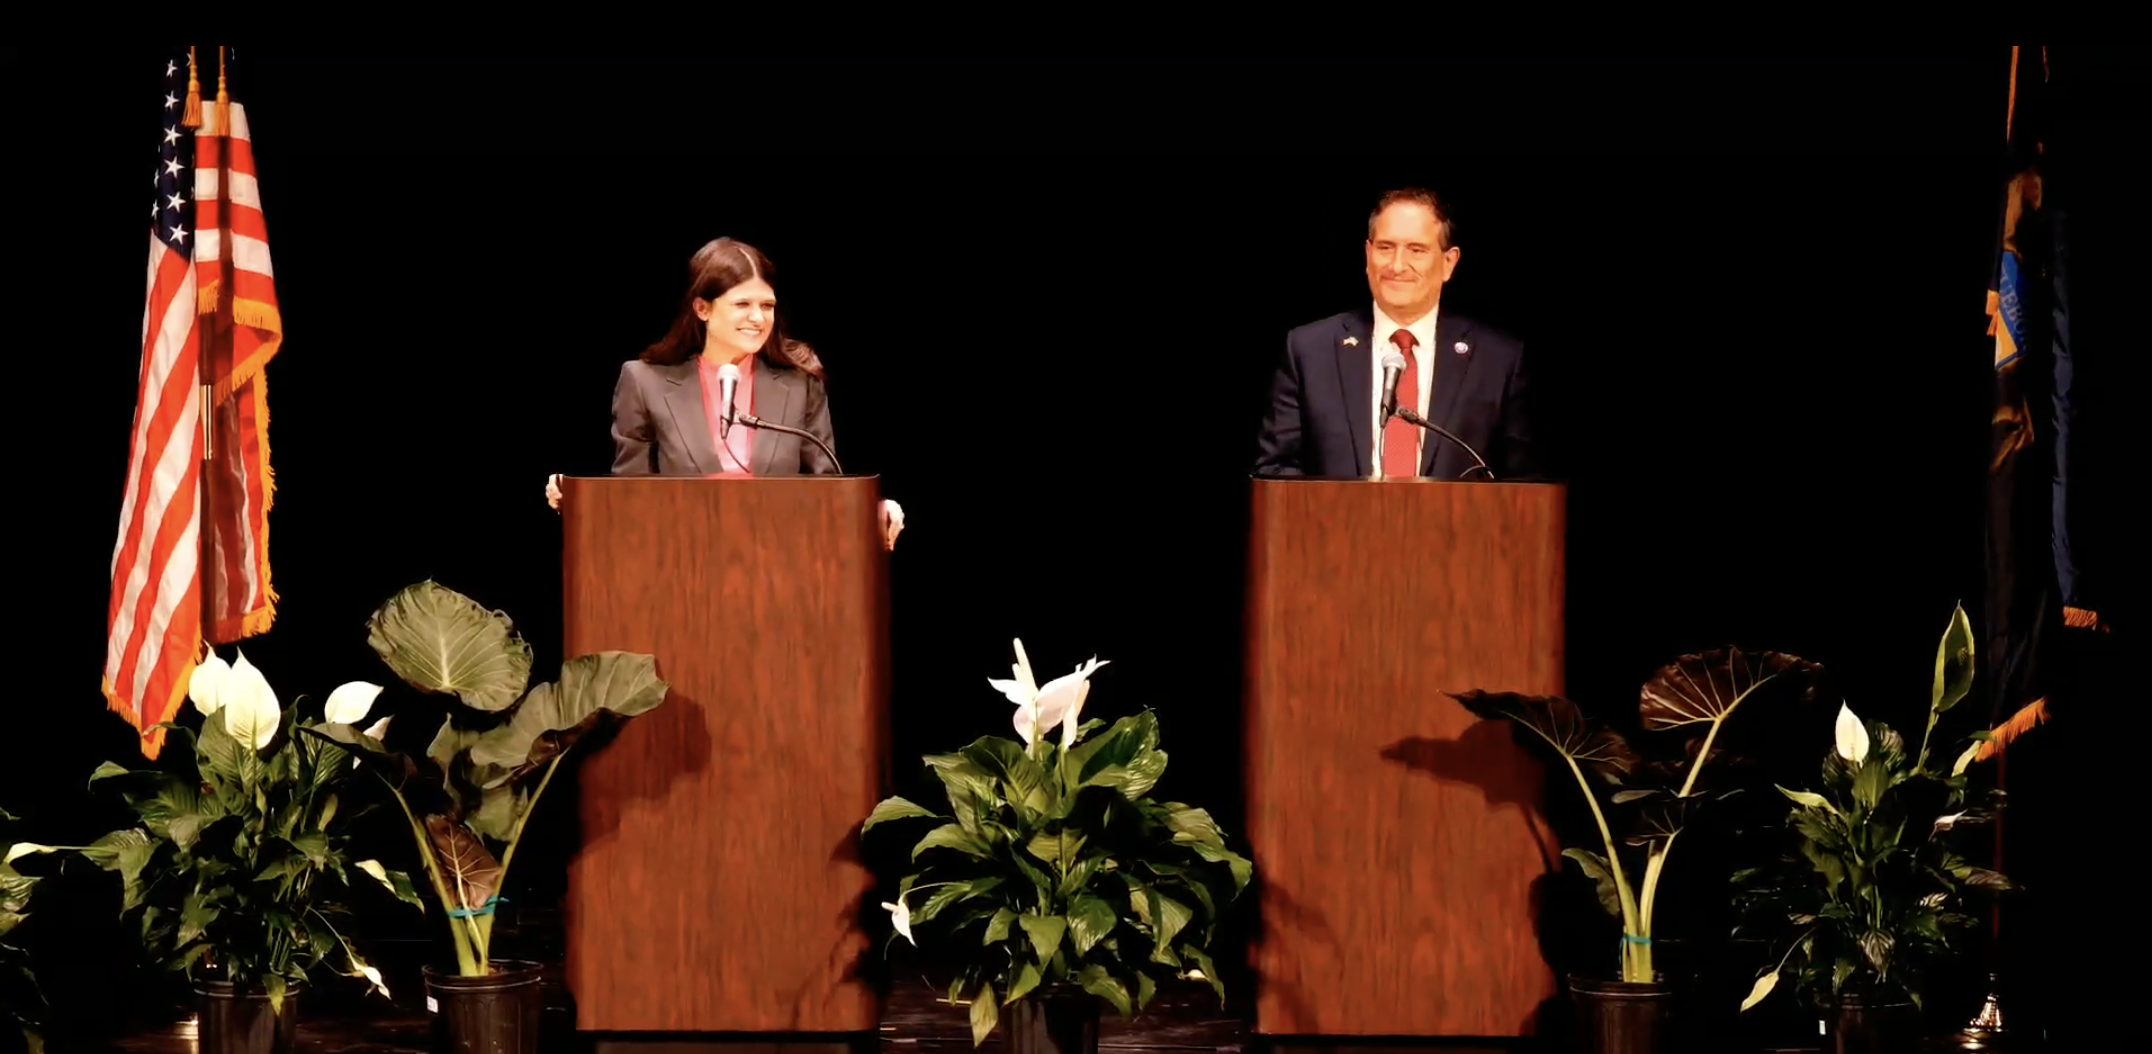 11th Congressional District candidates Haley Stevens and Andy Levin debate at a community forum hosted by Oakland Forward and the Pontiac Community Foundation. Photo: Screengrab/Pontiac Community Foundation